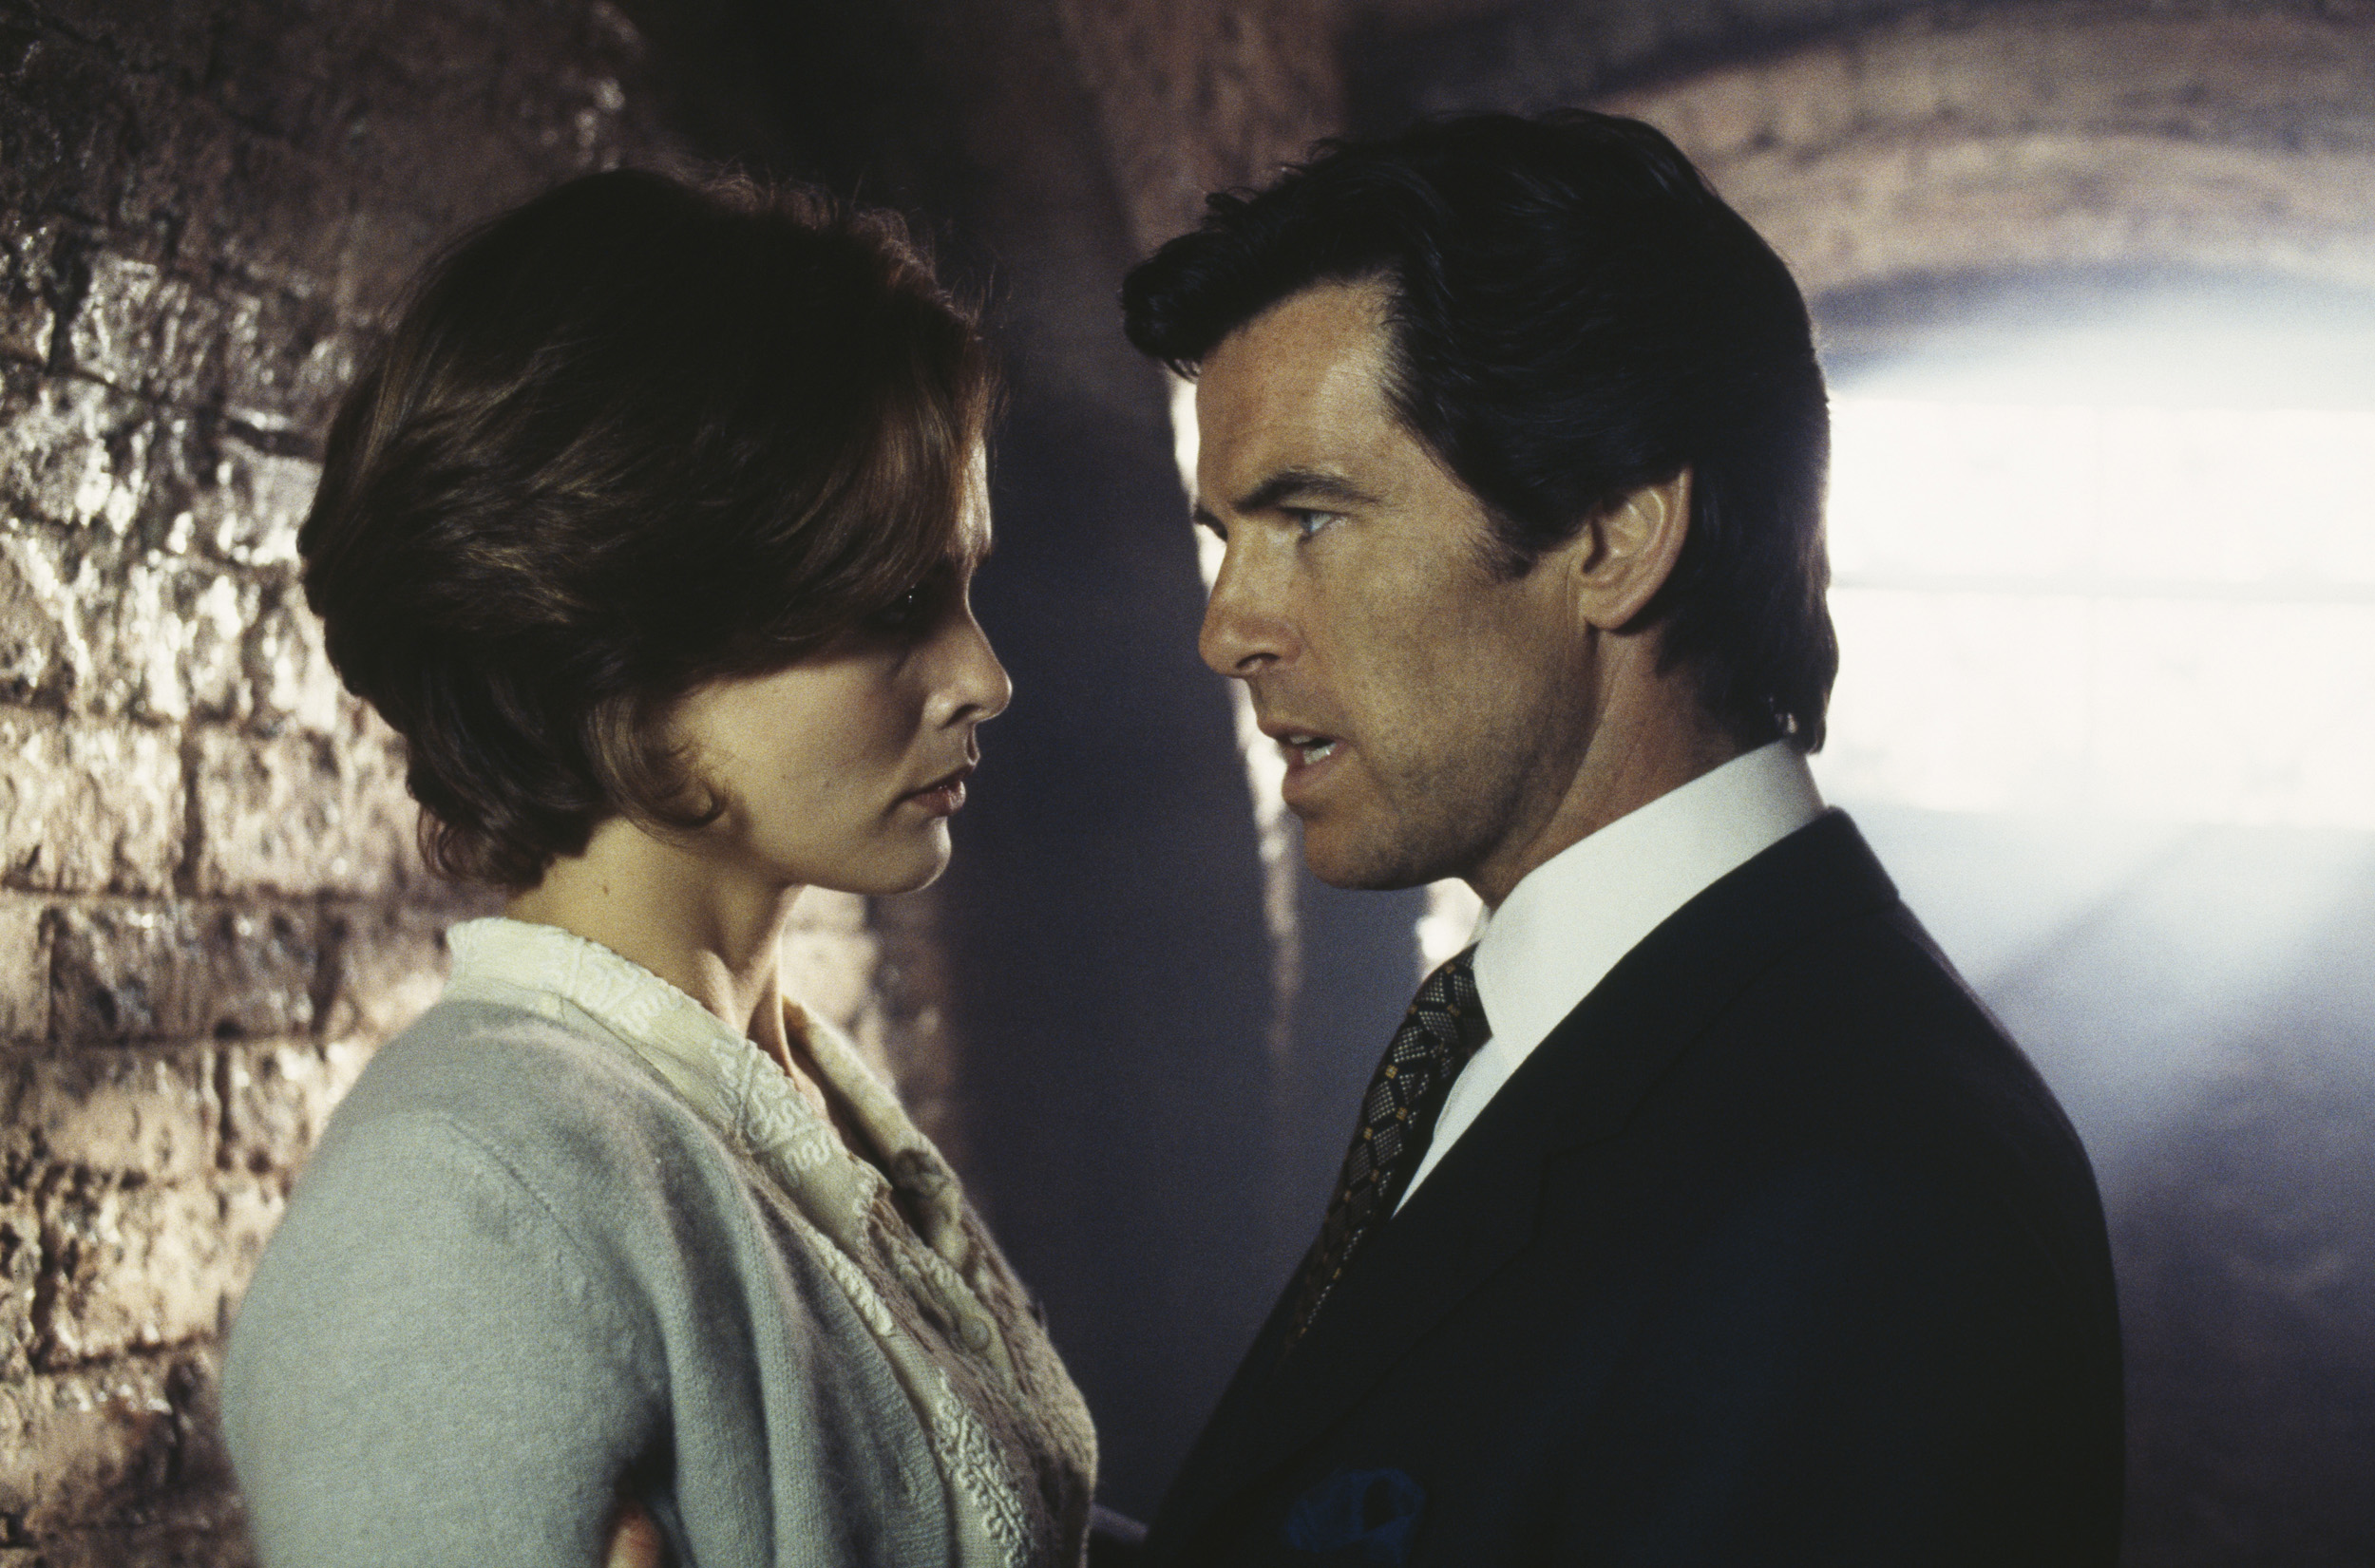 GoldenEye Review: What To REALLY Expect If You Stay